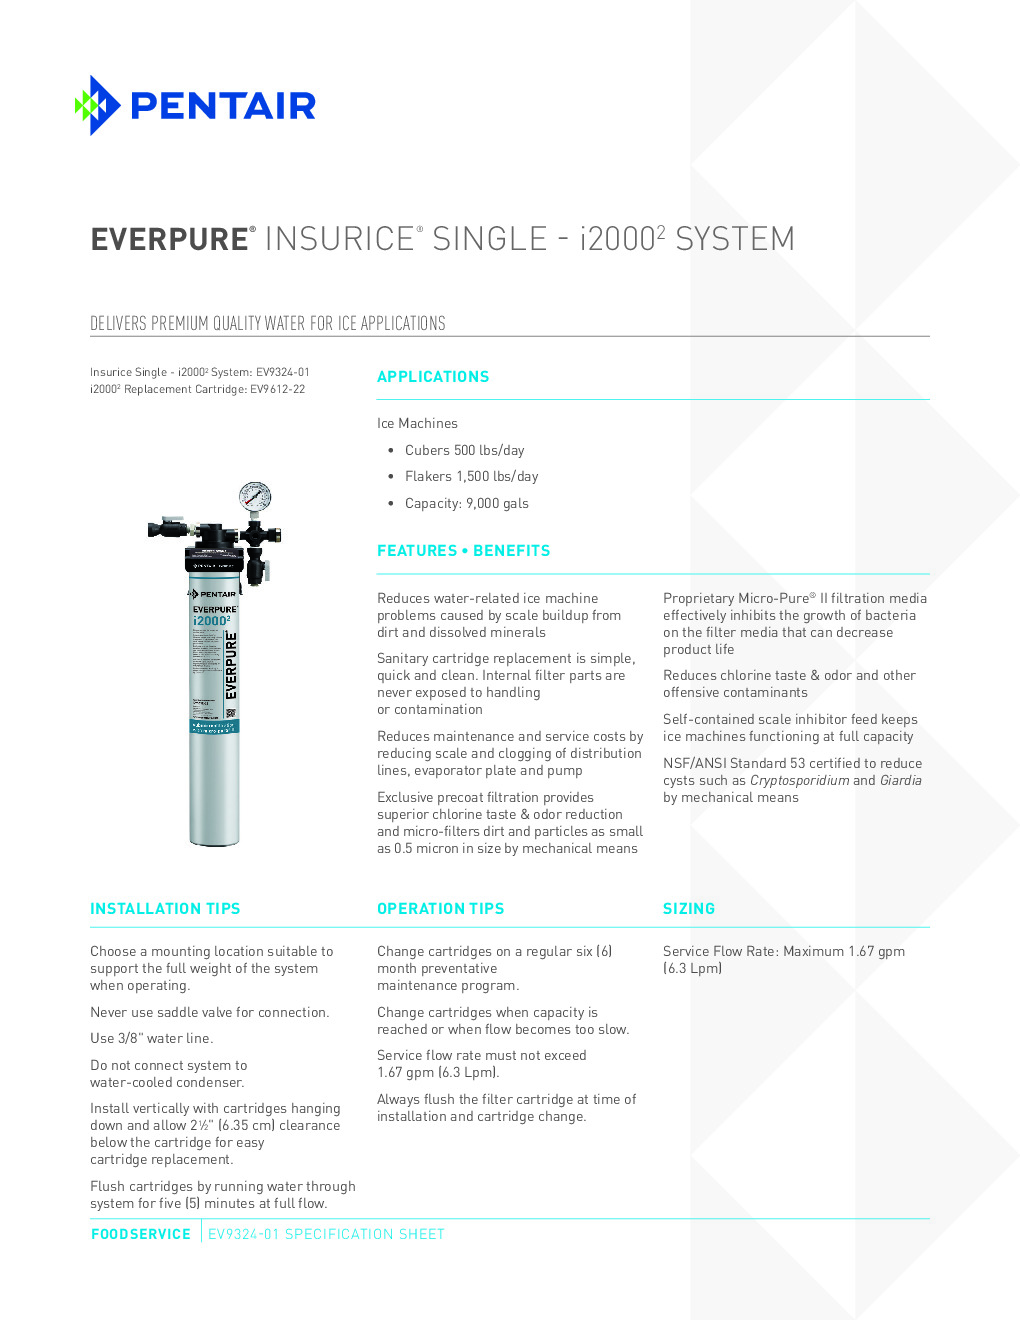 Everpure EV932401 for Ice Machines Water Filtration System - Scratch and dent